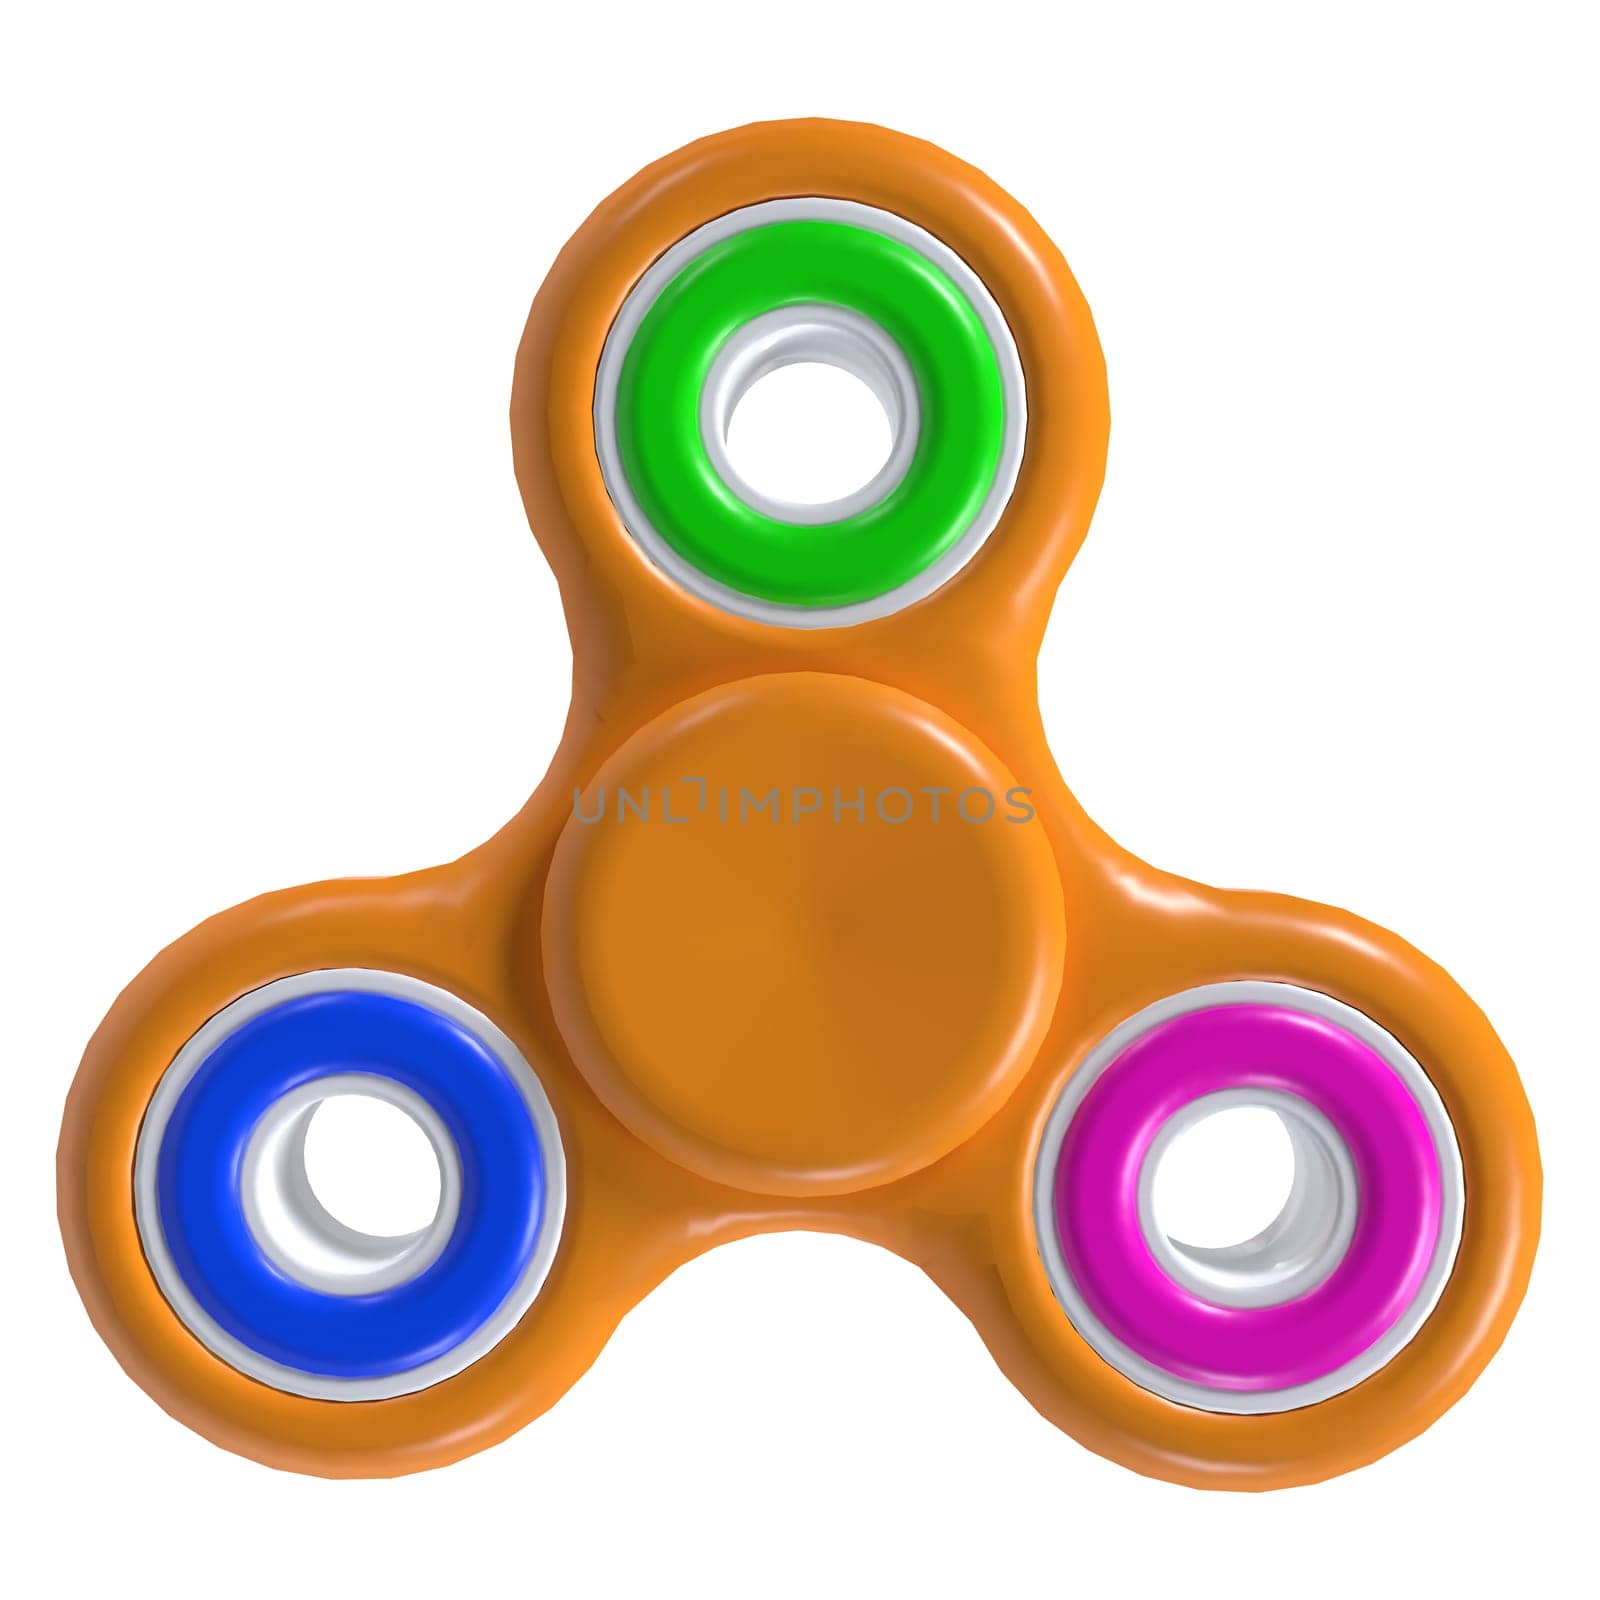 Colorful Spinner isolated on white background. High quality 3d illustration